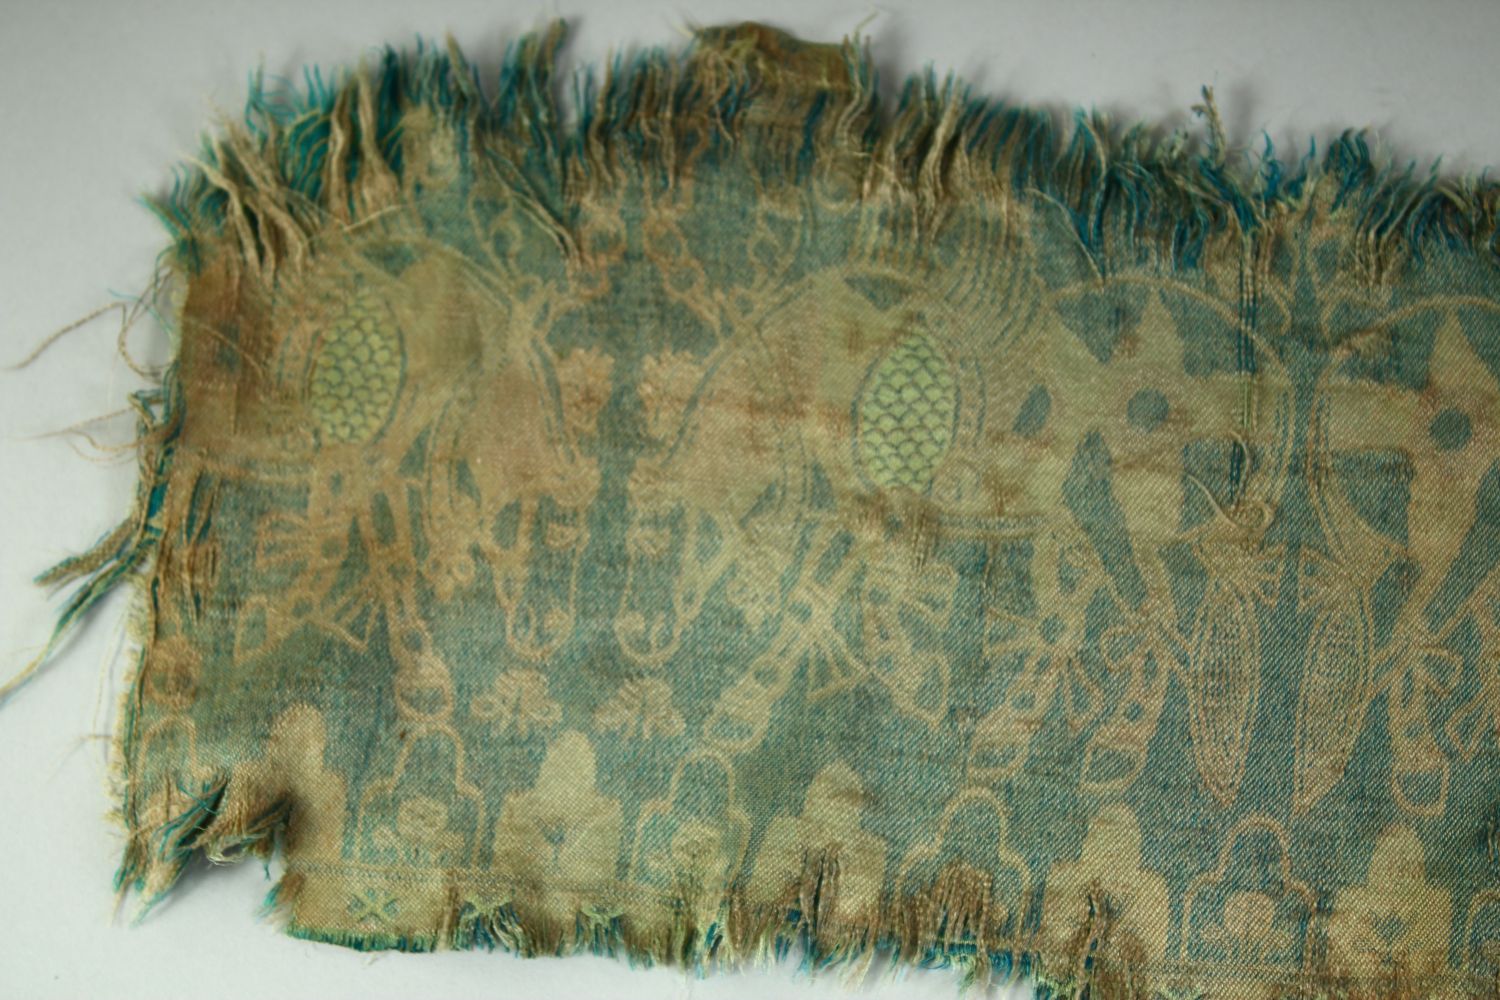 AN ISLAMIC TEXTILE FRAGMENT, embroidered with horses. - Image 8 of 8